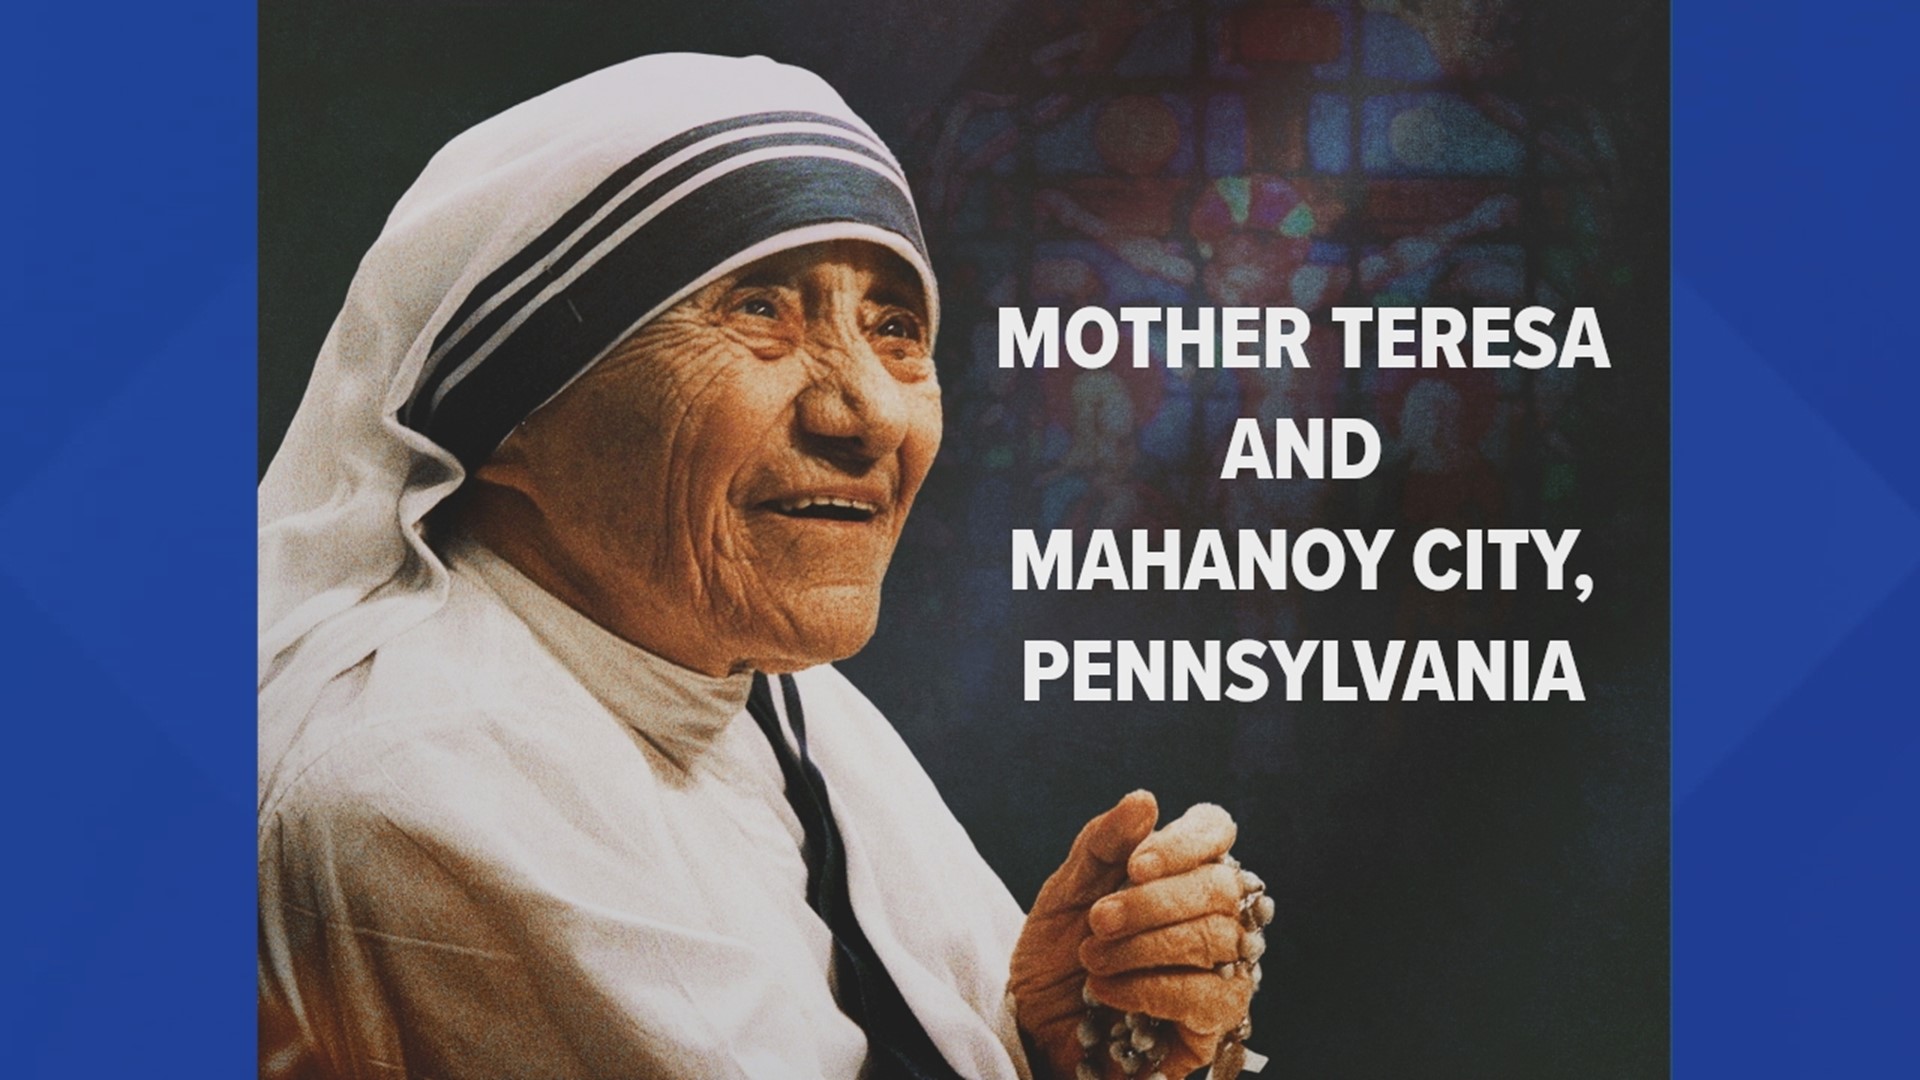 Mahanoy City, Pennsylvania has a special connection with Mother Teresa. Learn more with these curated stories From the WNEP Archive.